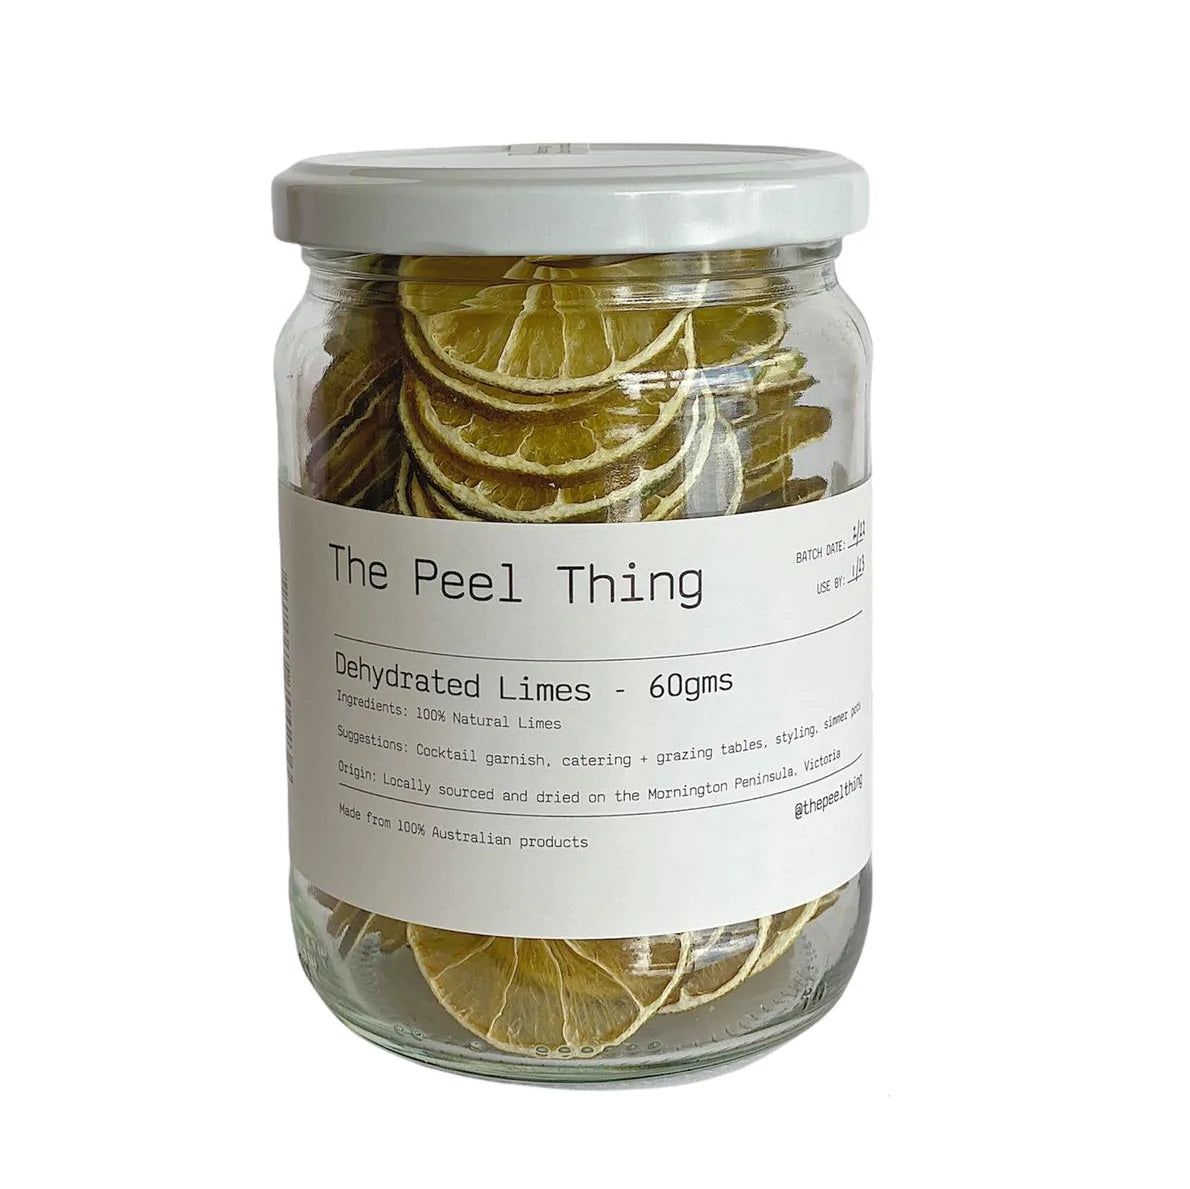 The Peel Thing Dehydrated Limes 60gms